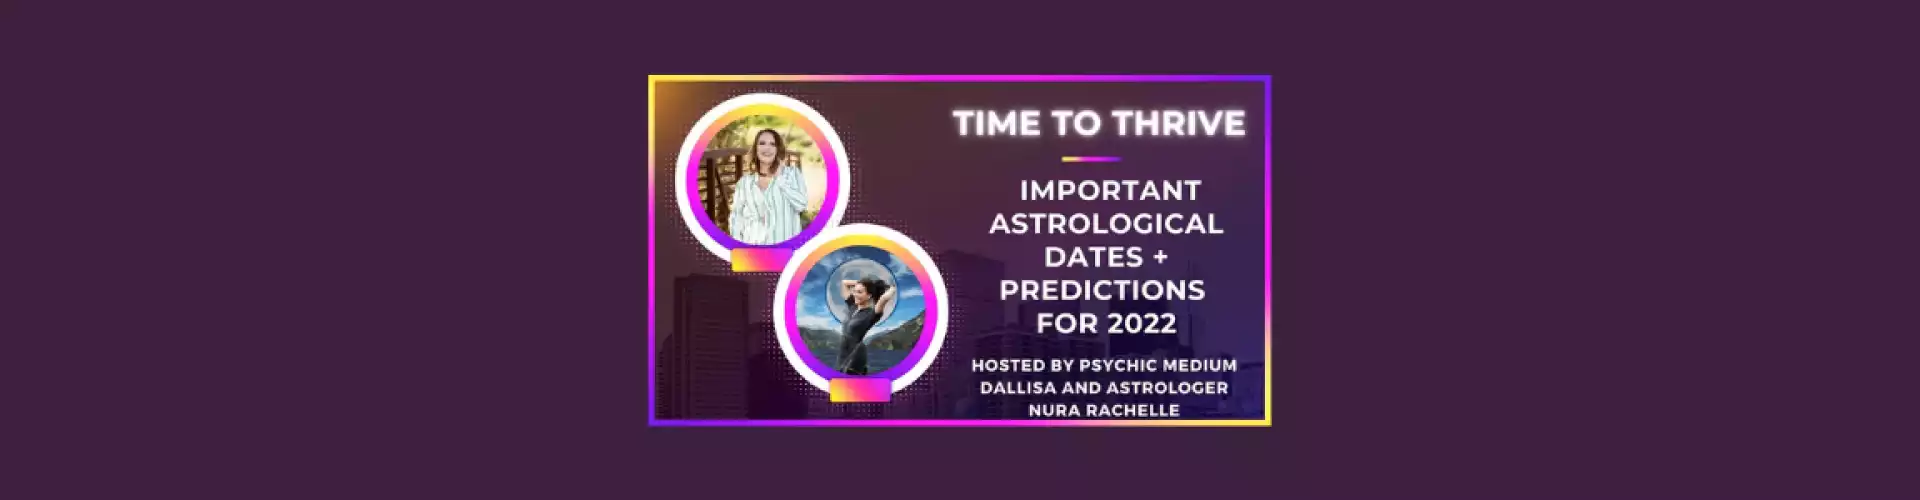 Time to Thrive: Important Astrological Dates and Predictions for 2022